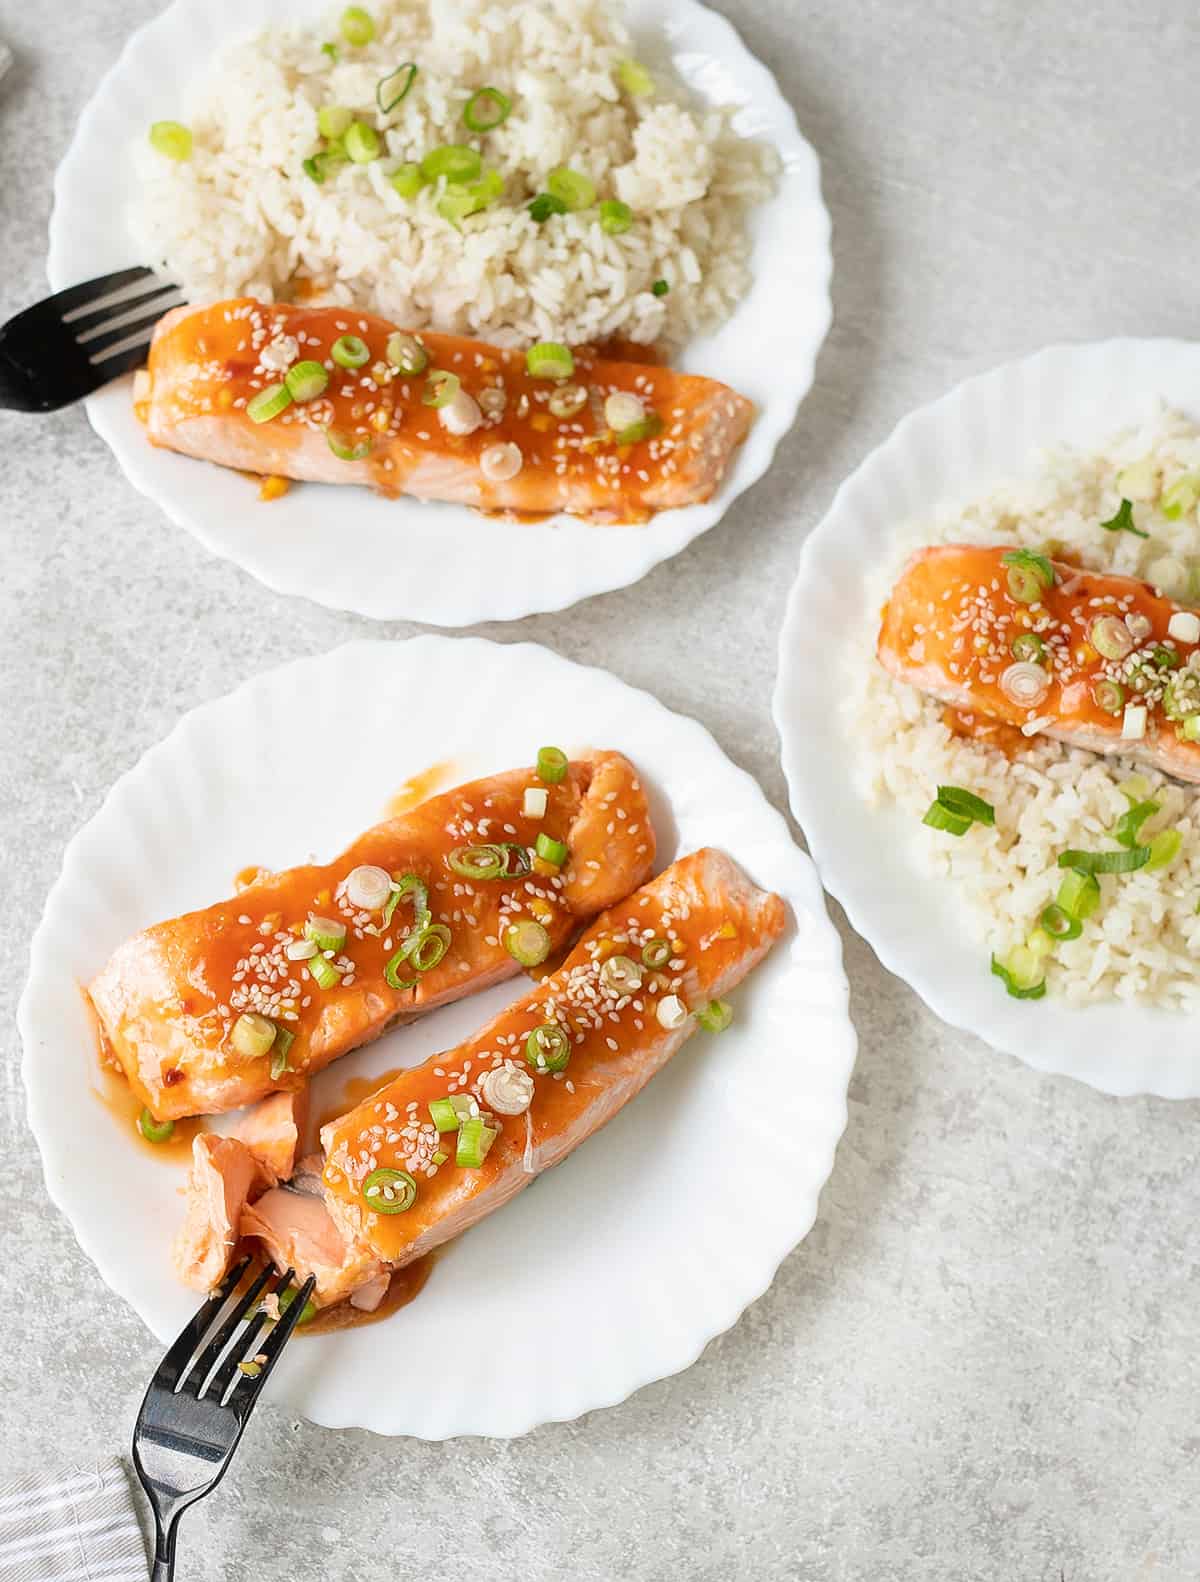 Pan Seared Salmon with Sweet and Sour Sauce.